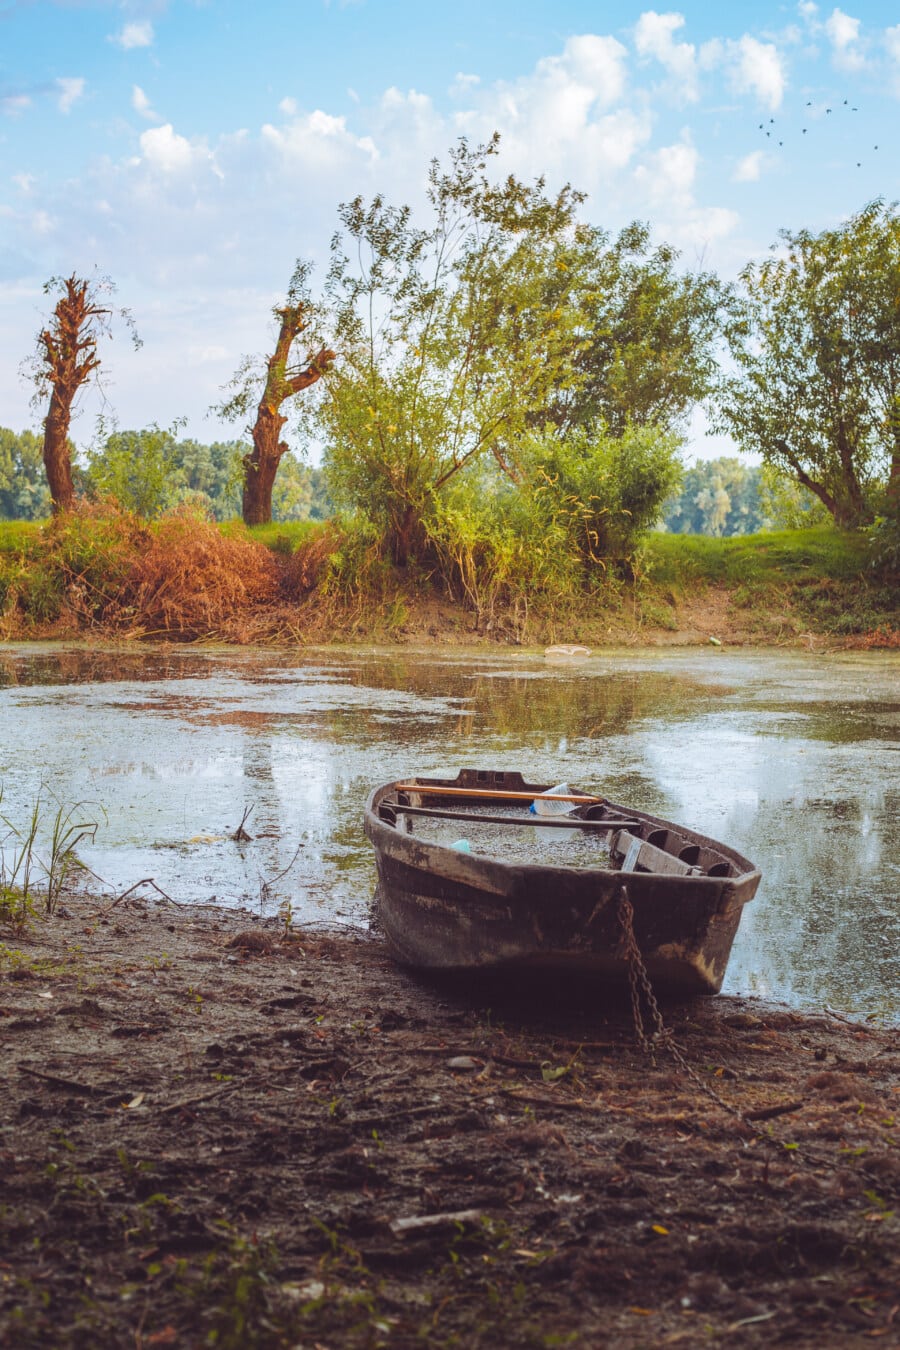 abandoned, river boat, wooden, flood, swamp, water, boat, nature, river, outdoors